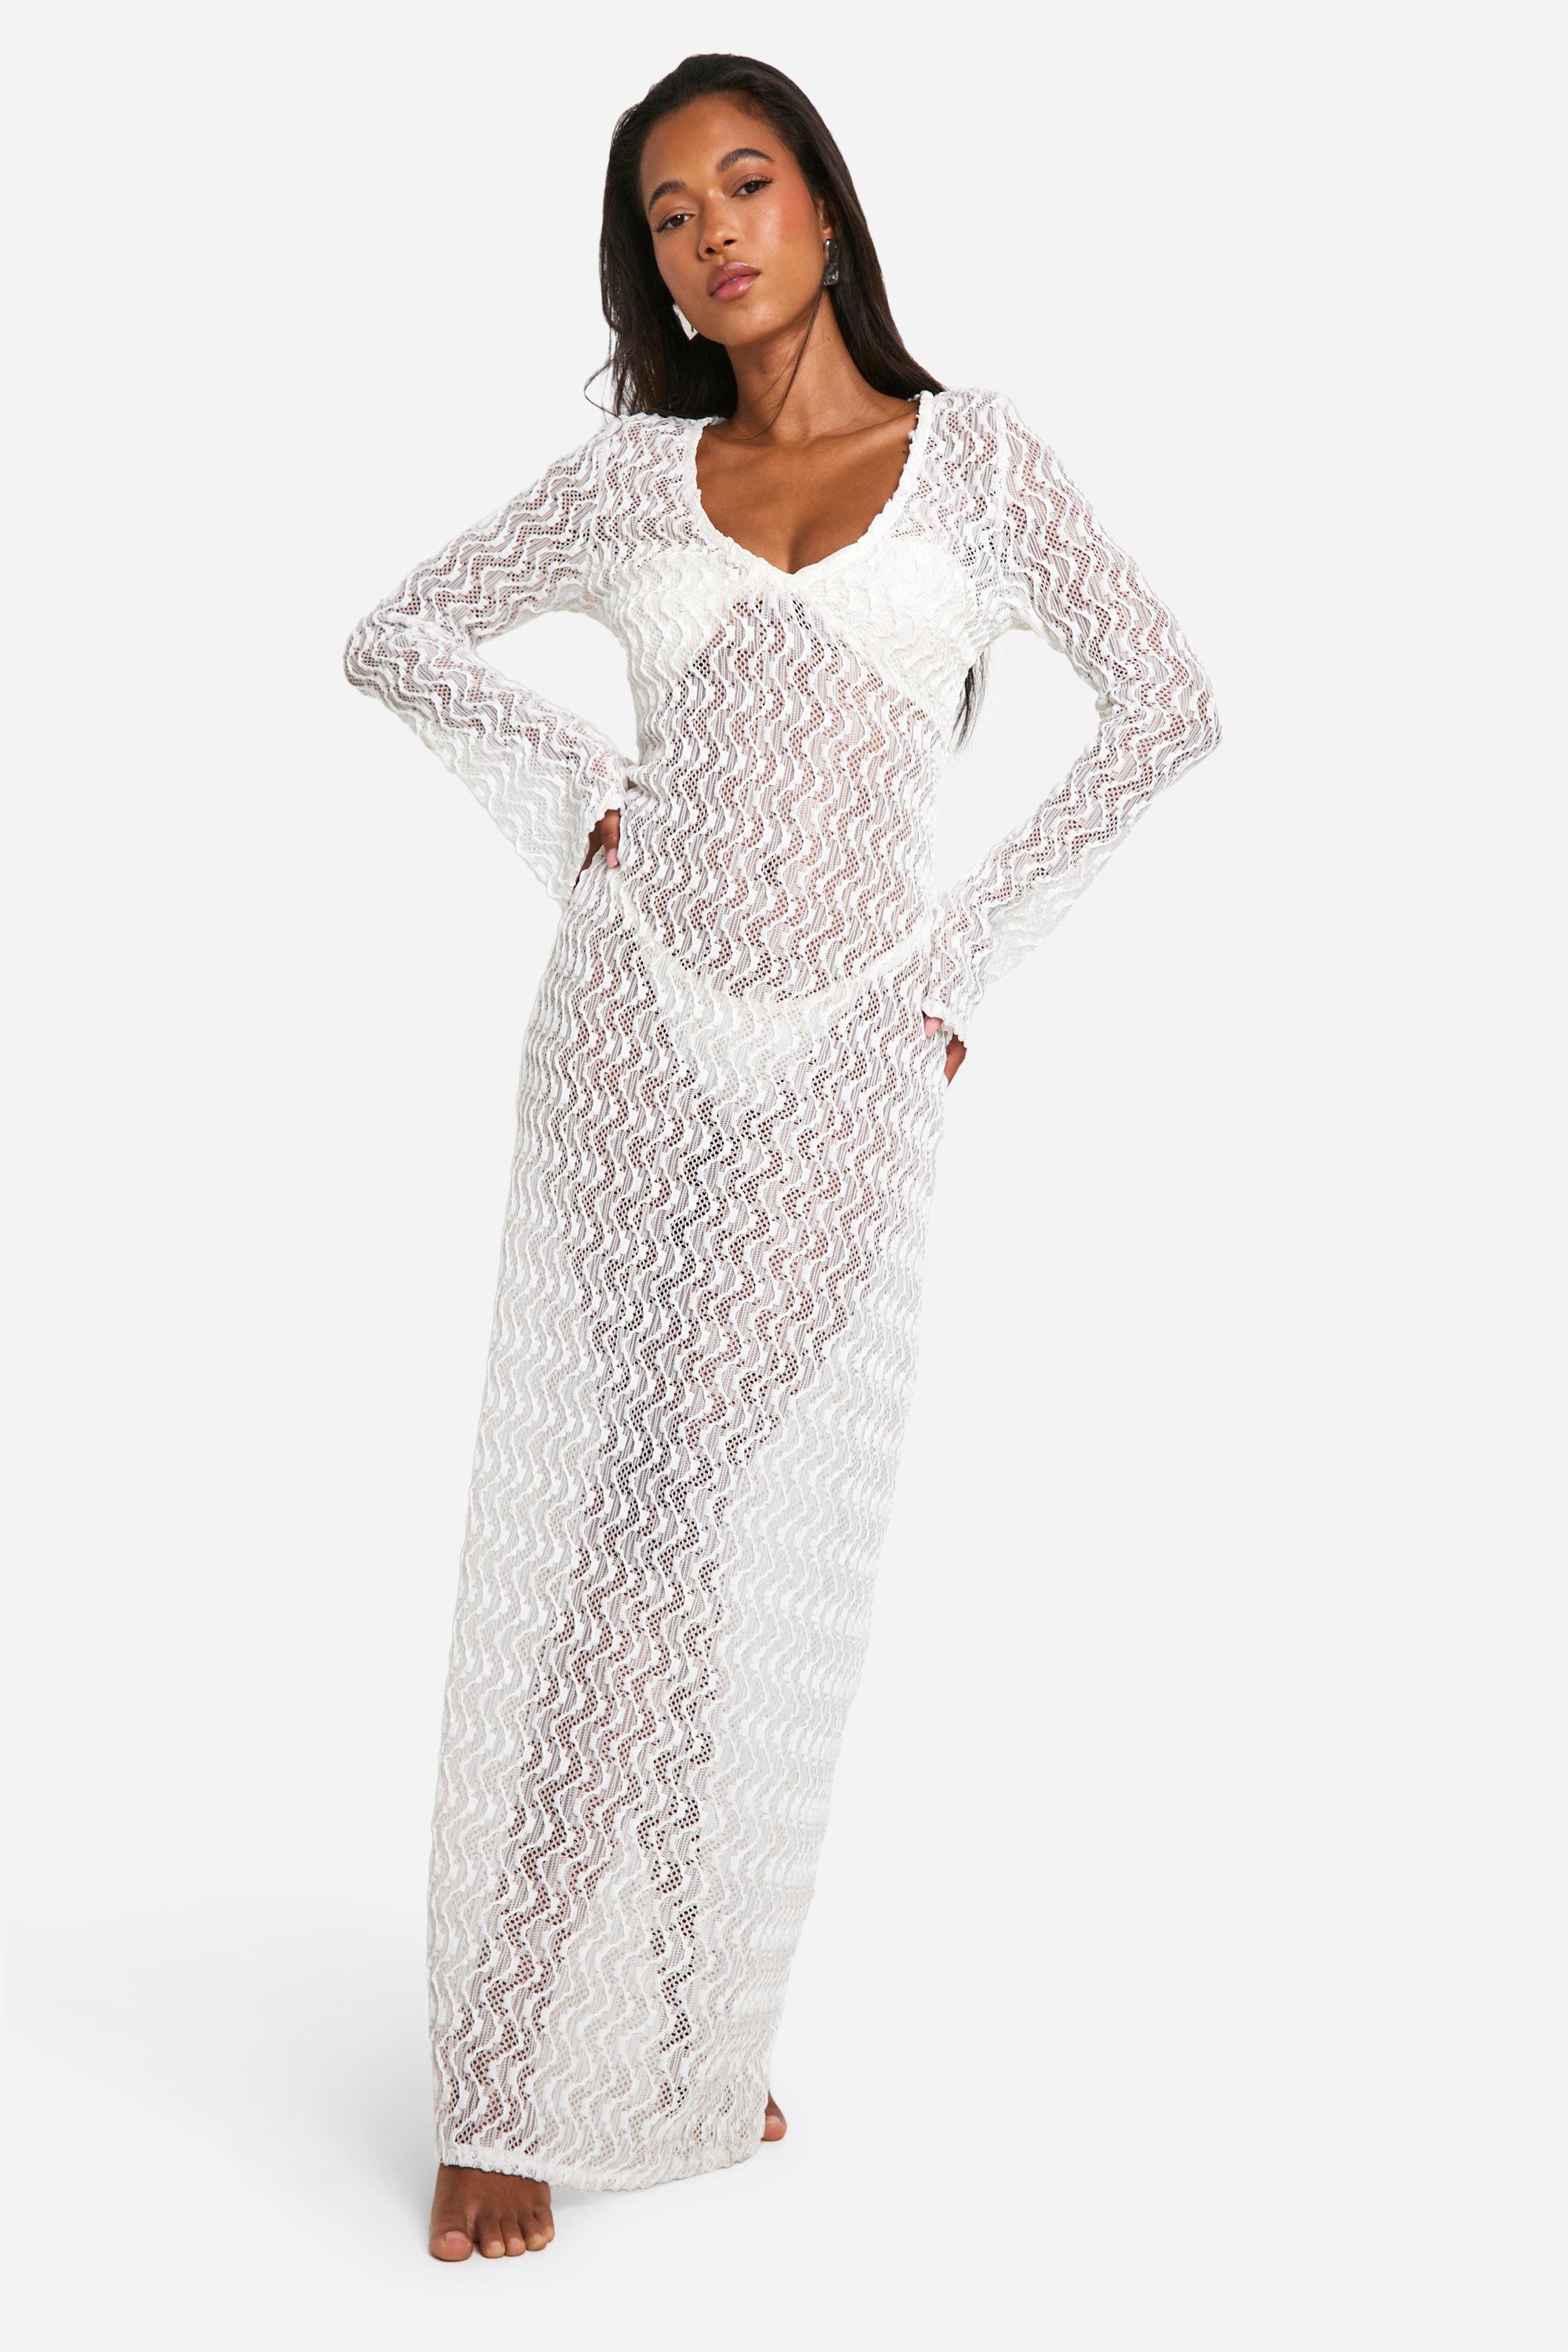 Image of Textured Lace Beach Maxi Cover-up Dress, Bianco